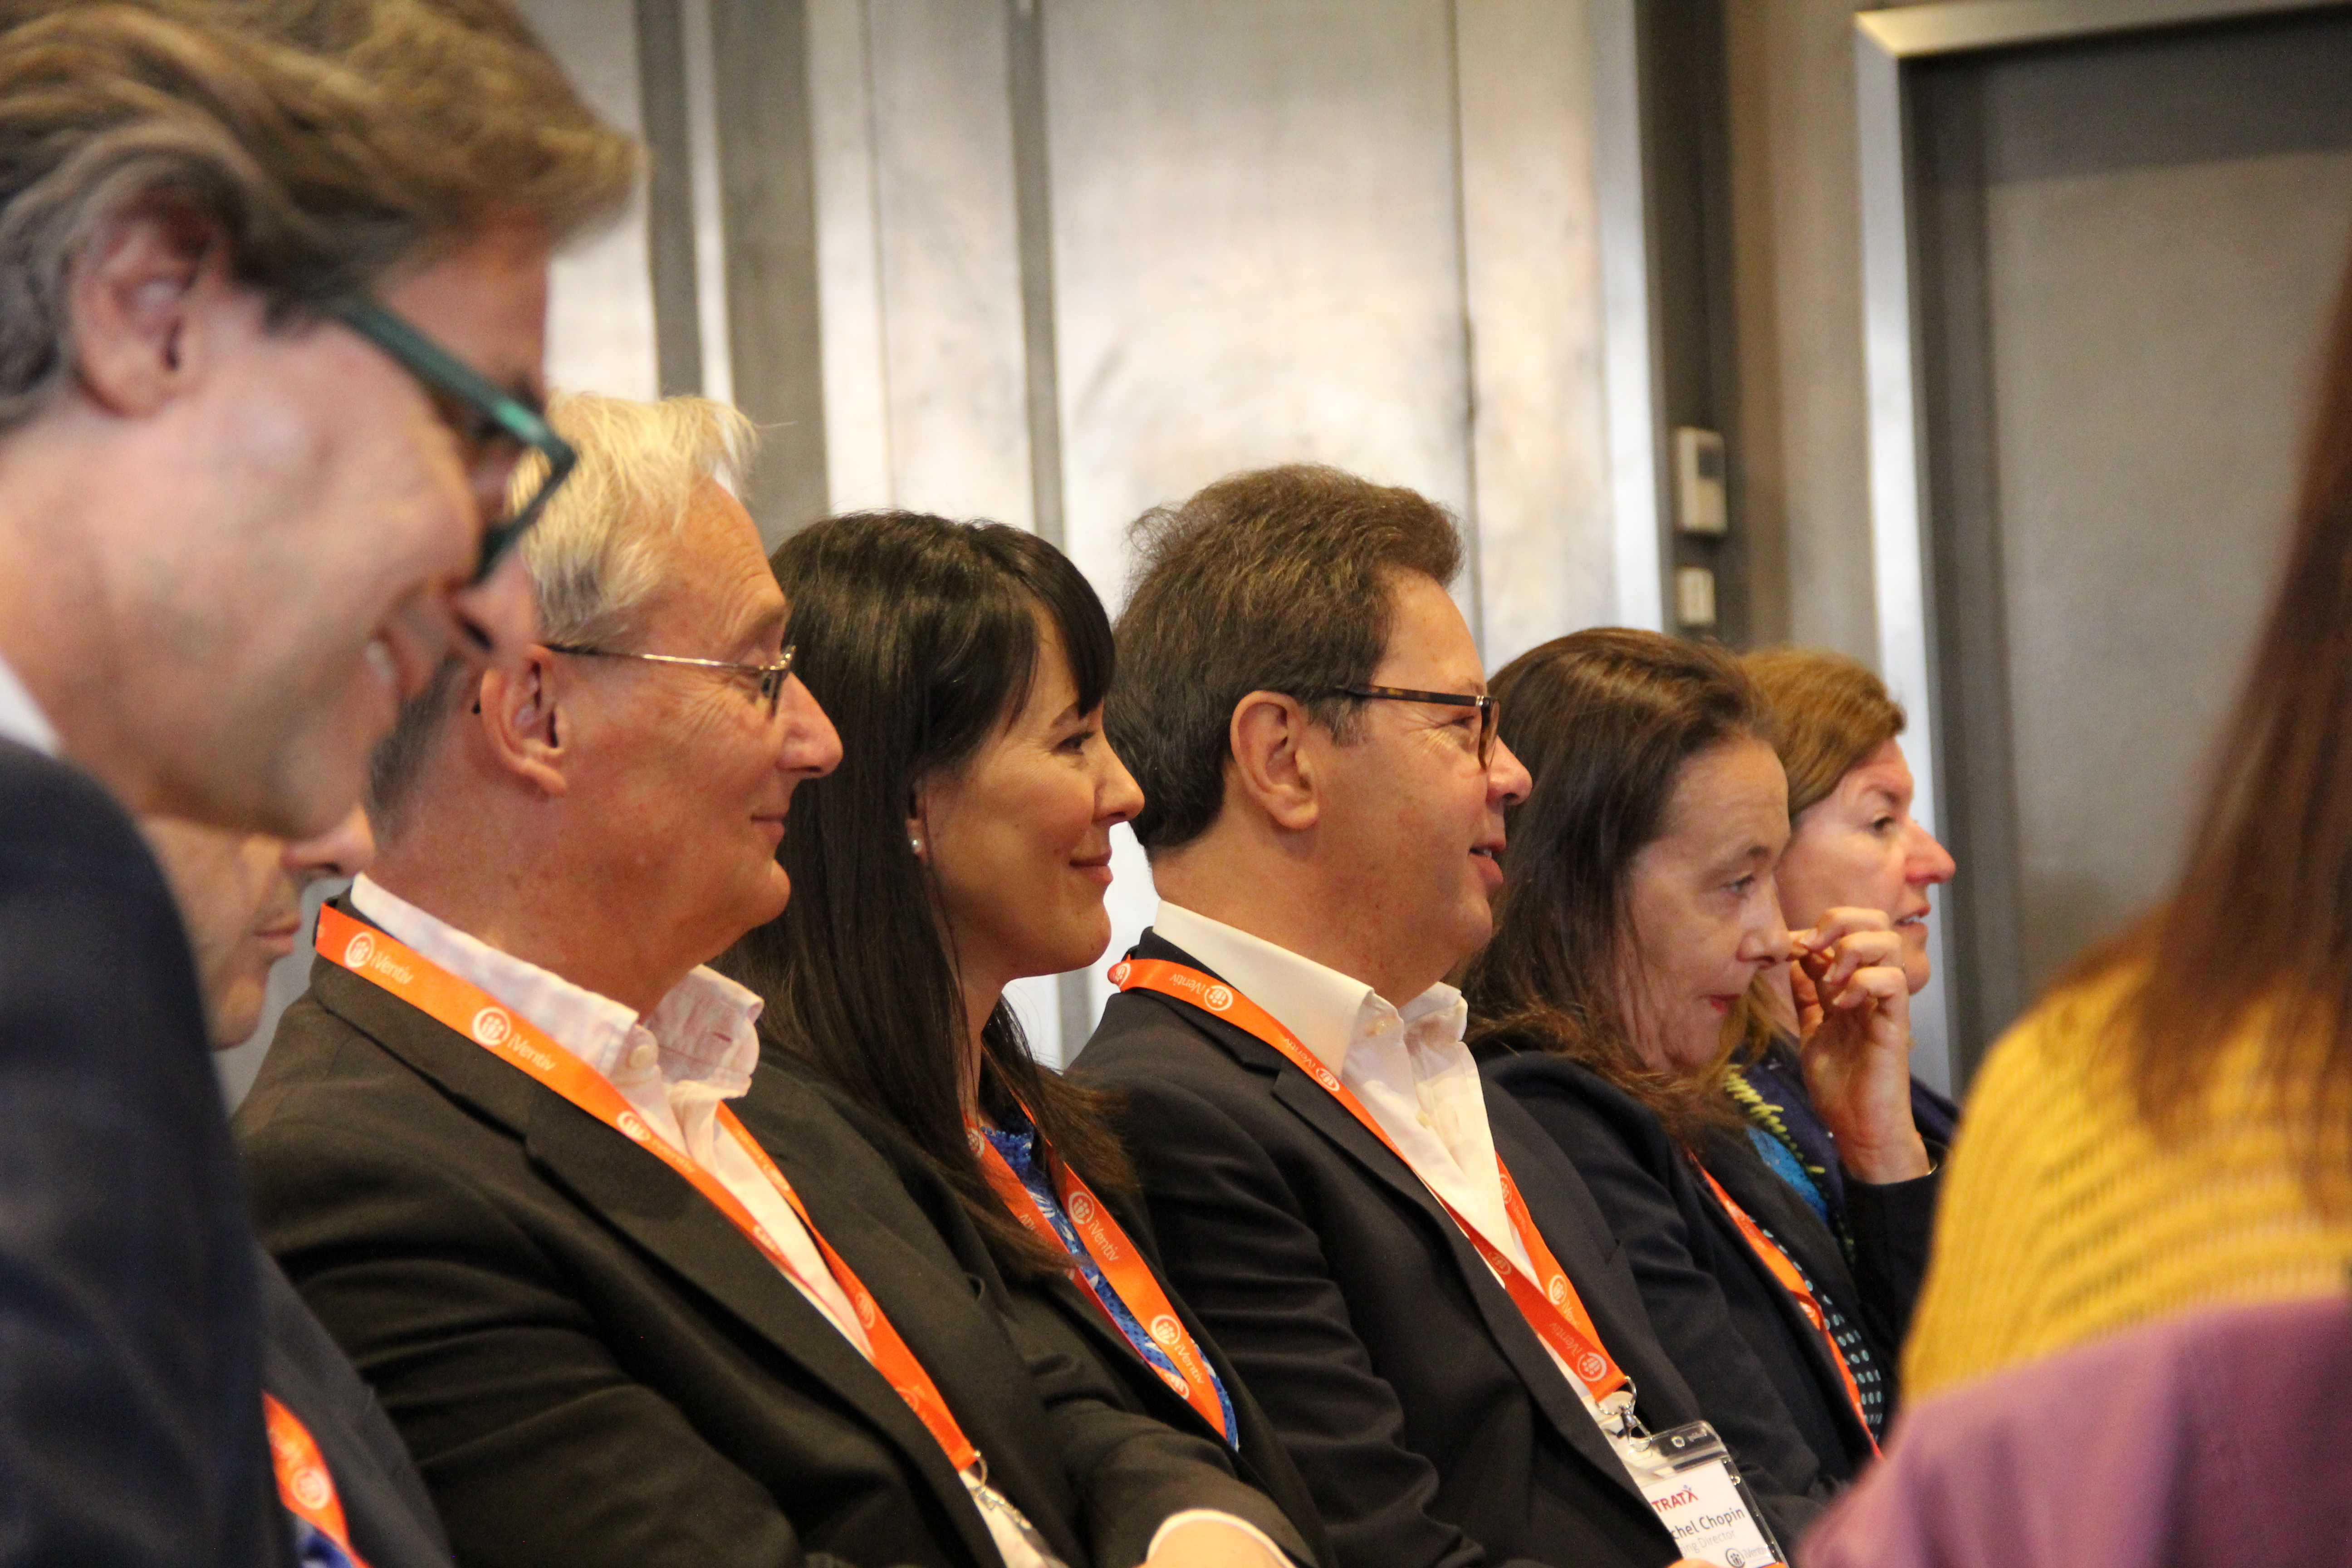 Participants engage in group collaborations at iVentiv's ED event in 2019